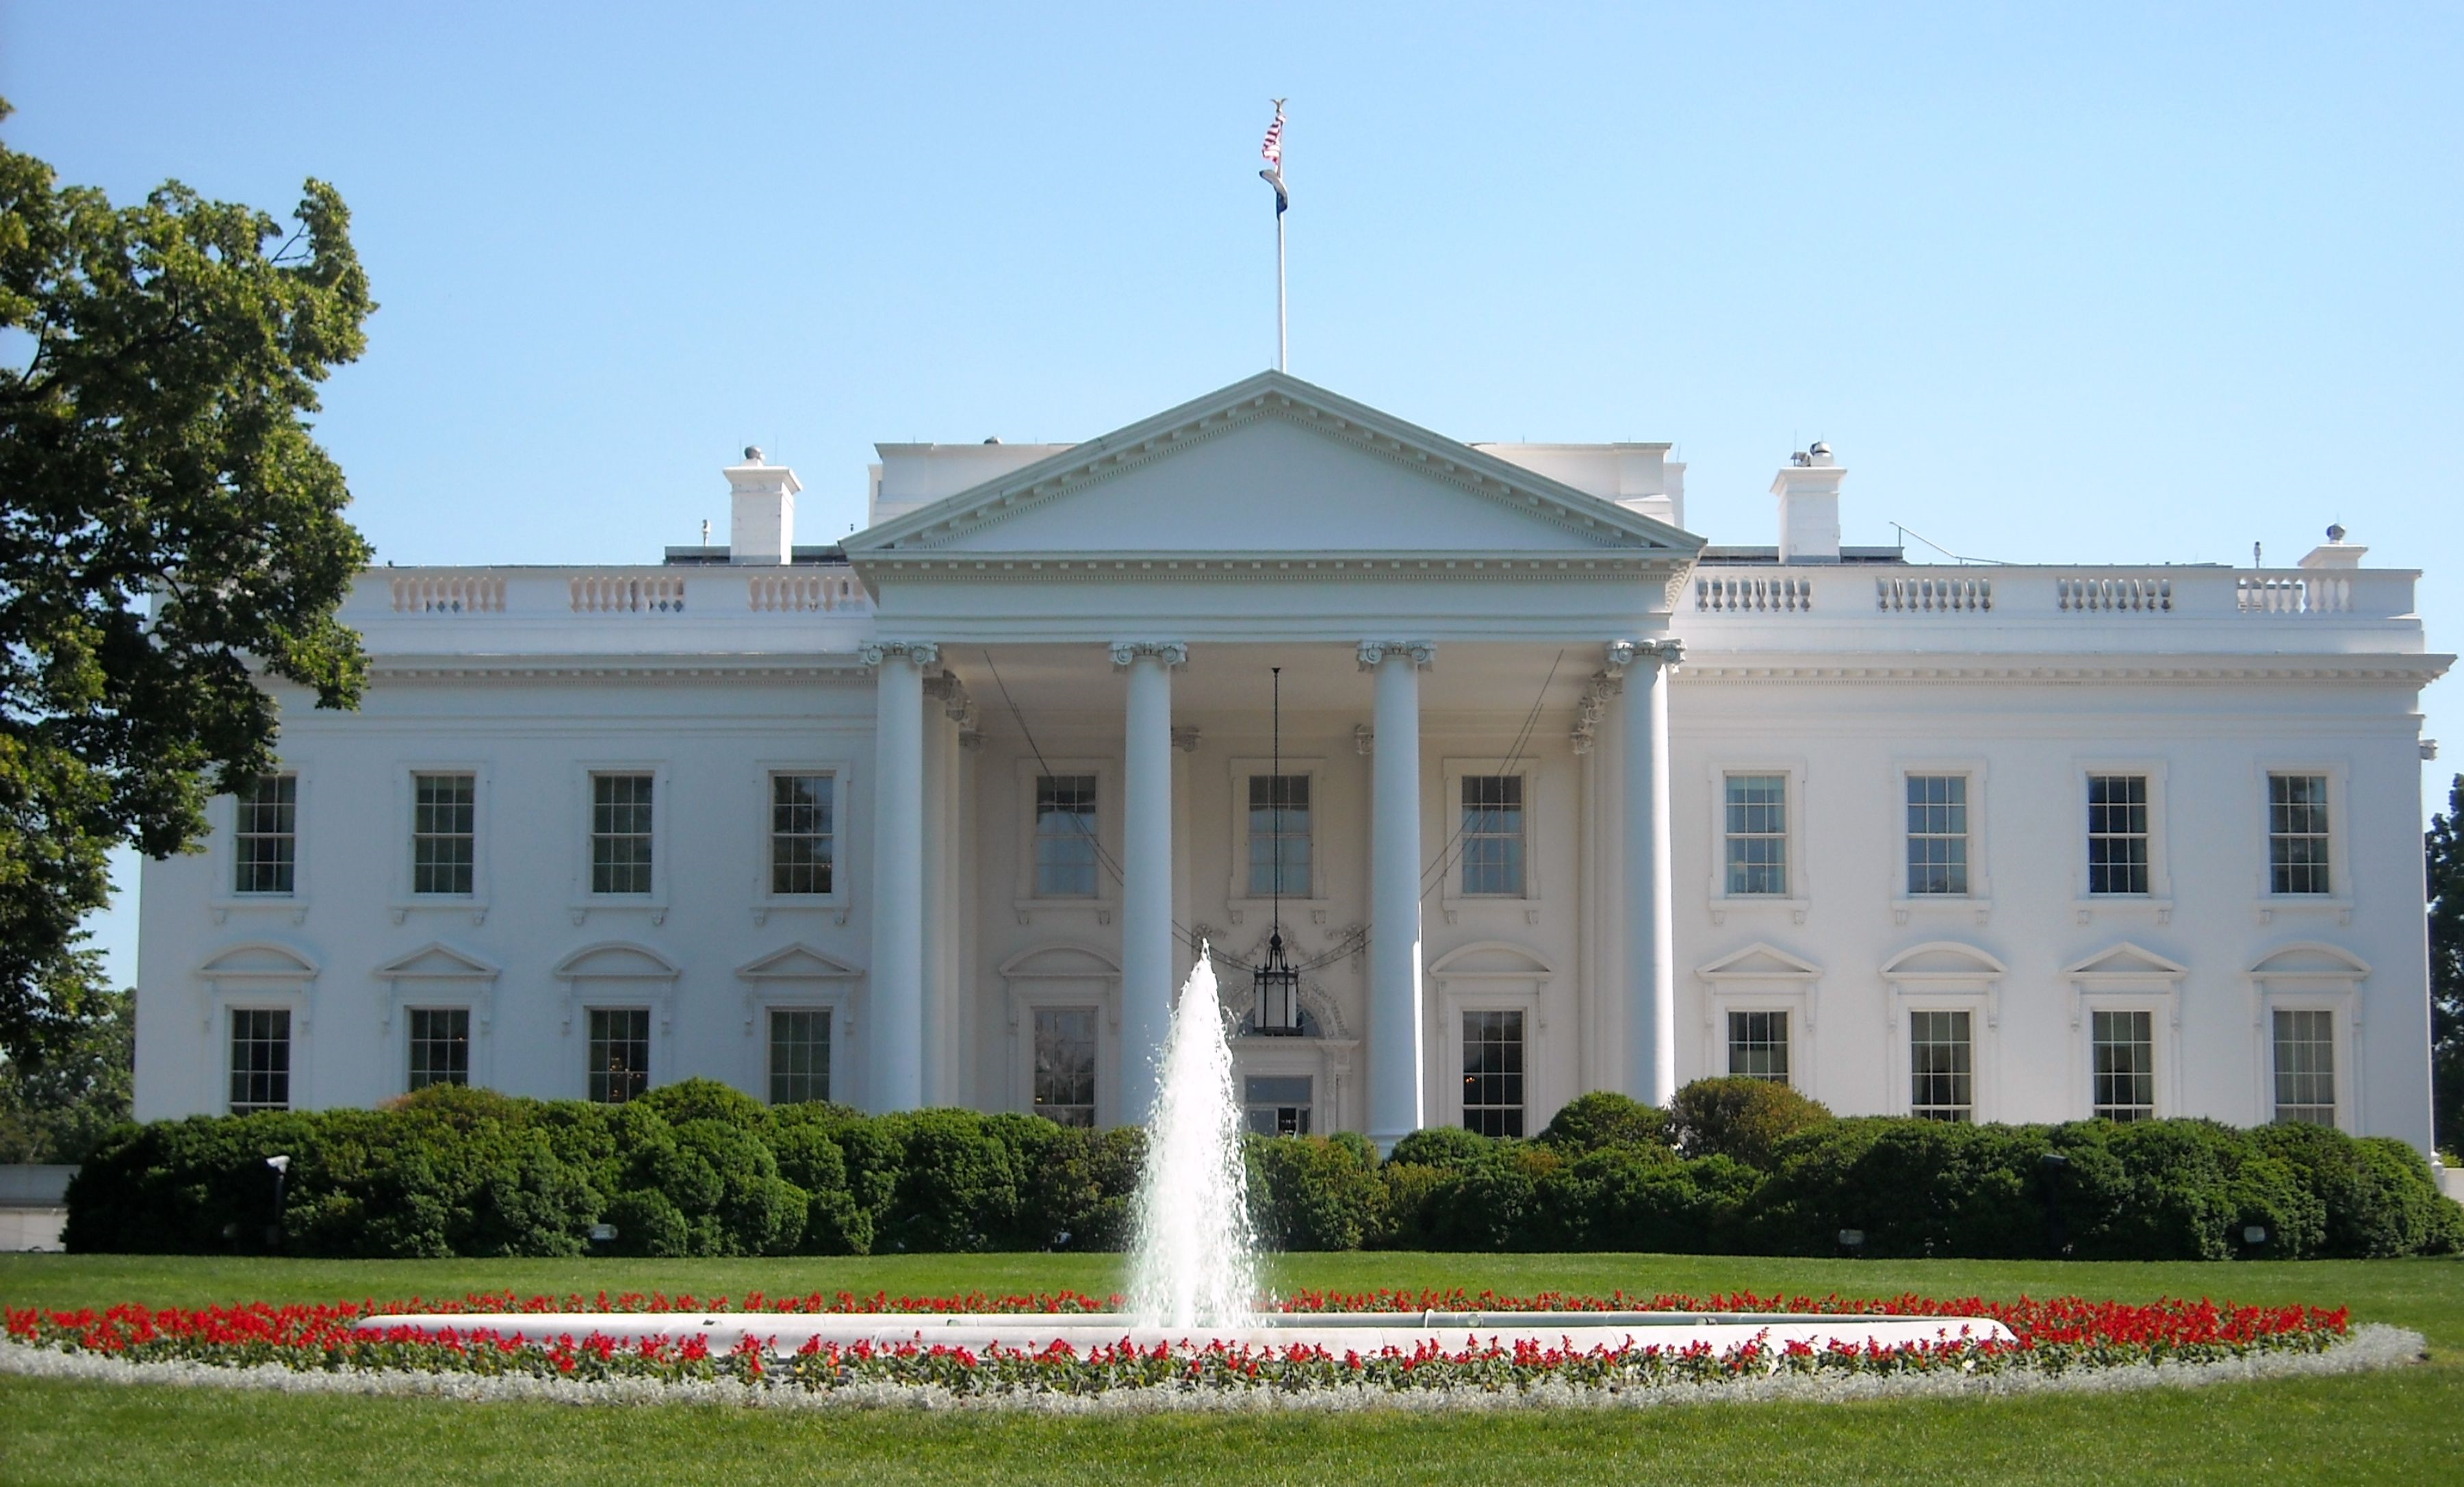 The White House. Photo by AgnosticPreachersKid [CC BY-SA 3.0 (https://creativecommons.org/licenses/by-sa/3.0)]